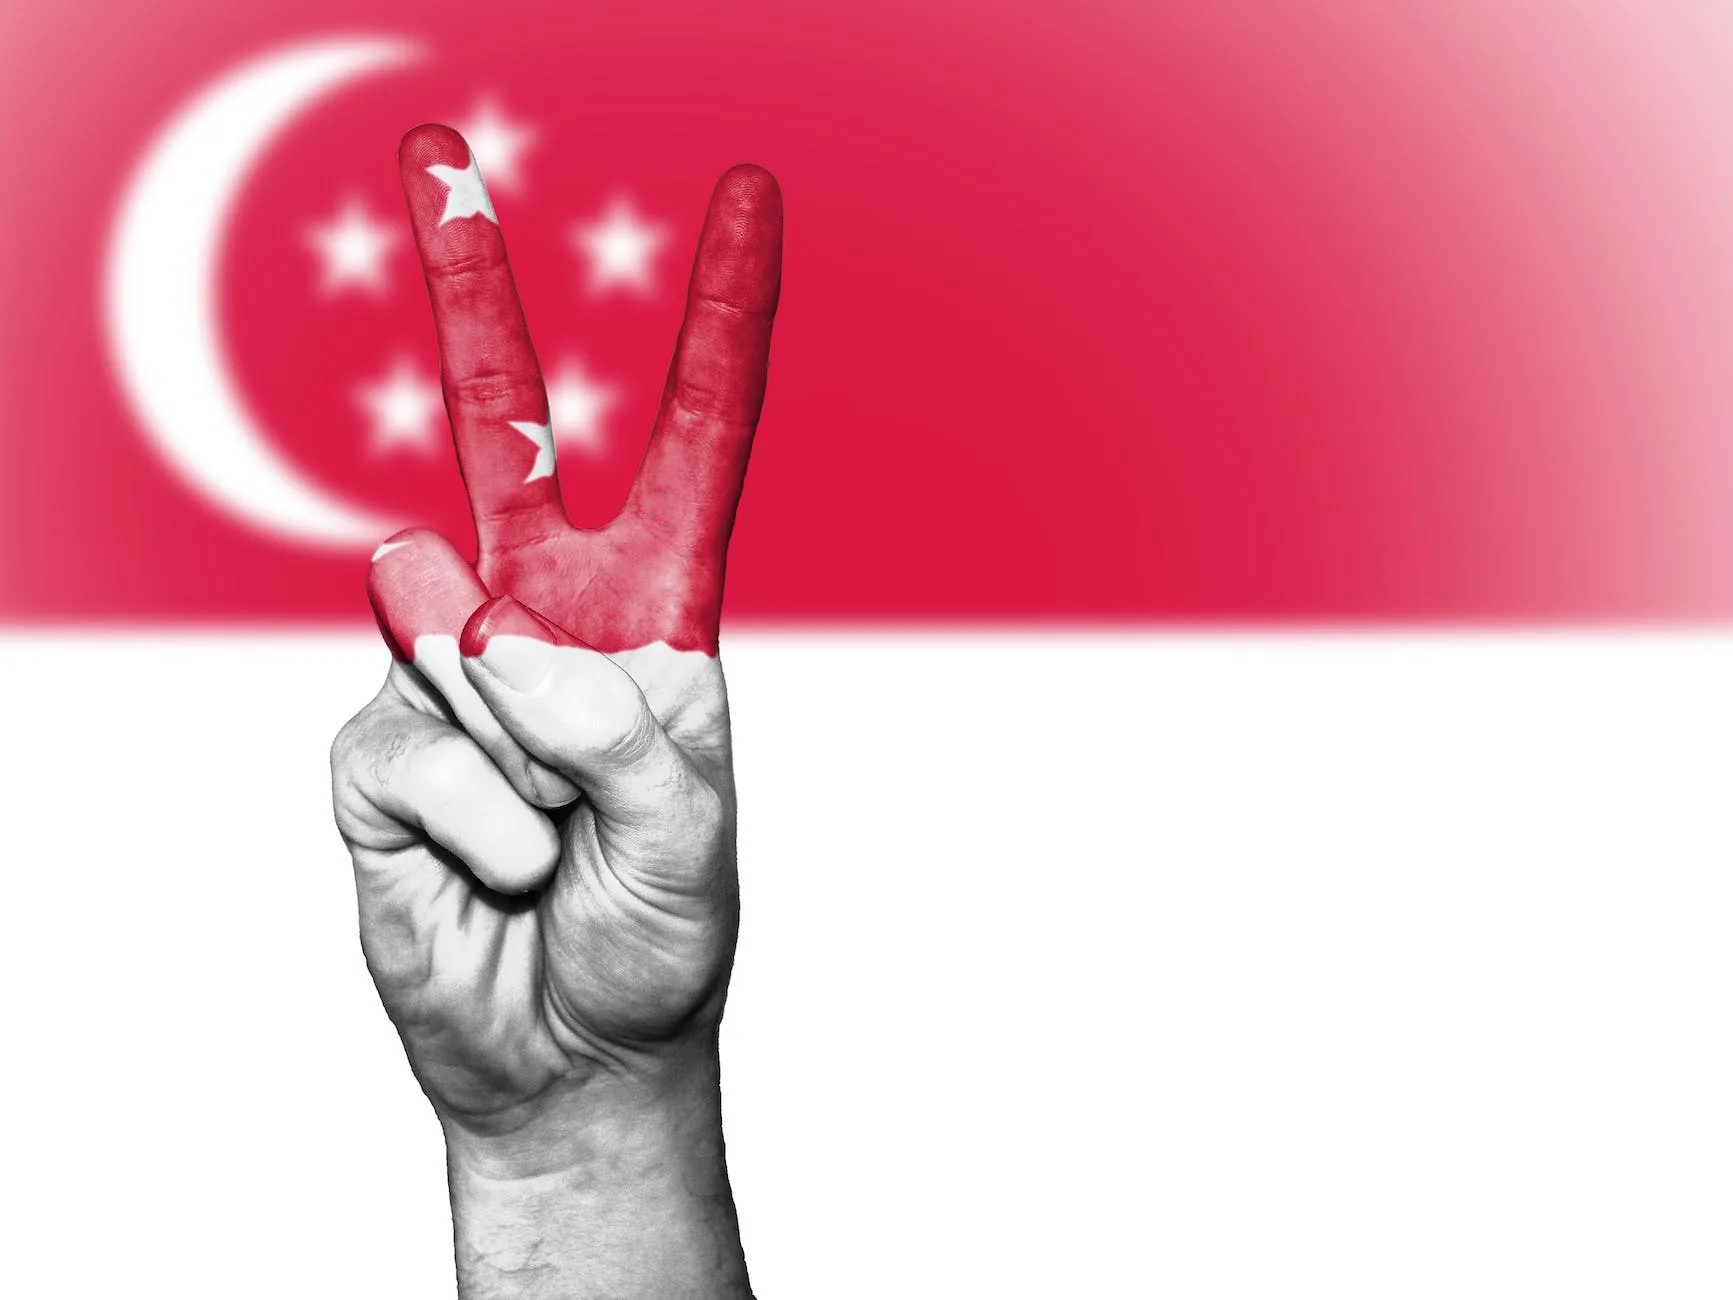 singapore flag themed painted hand in peace sign gesture